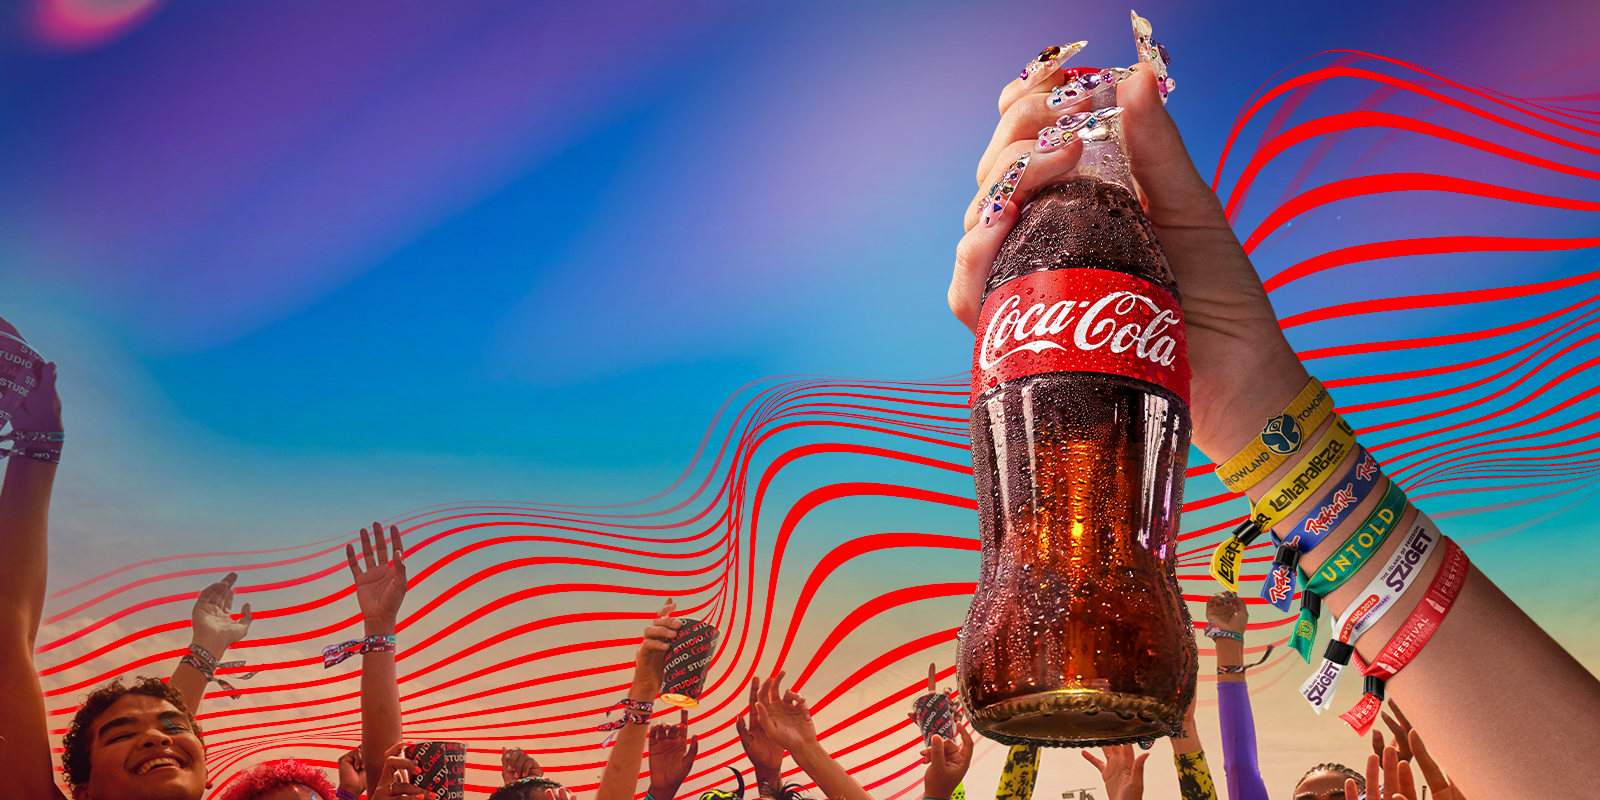 hand holding a bottle of coca-cola with festivals wristbands